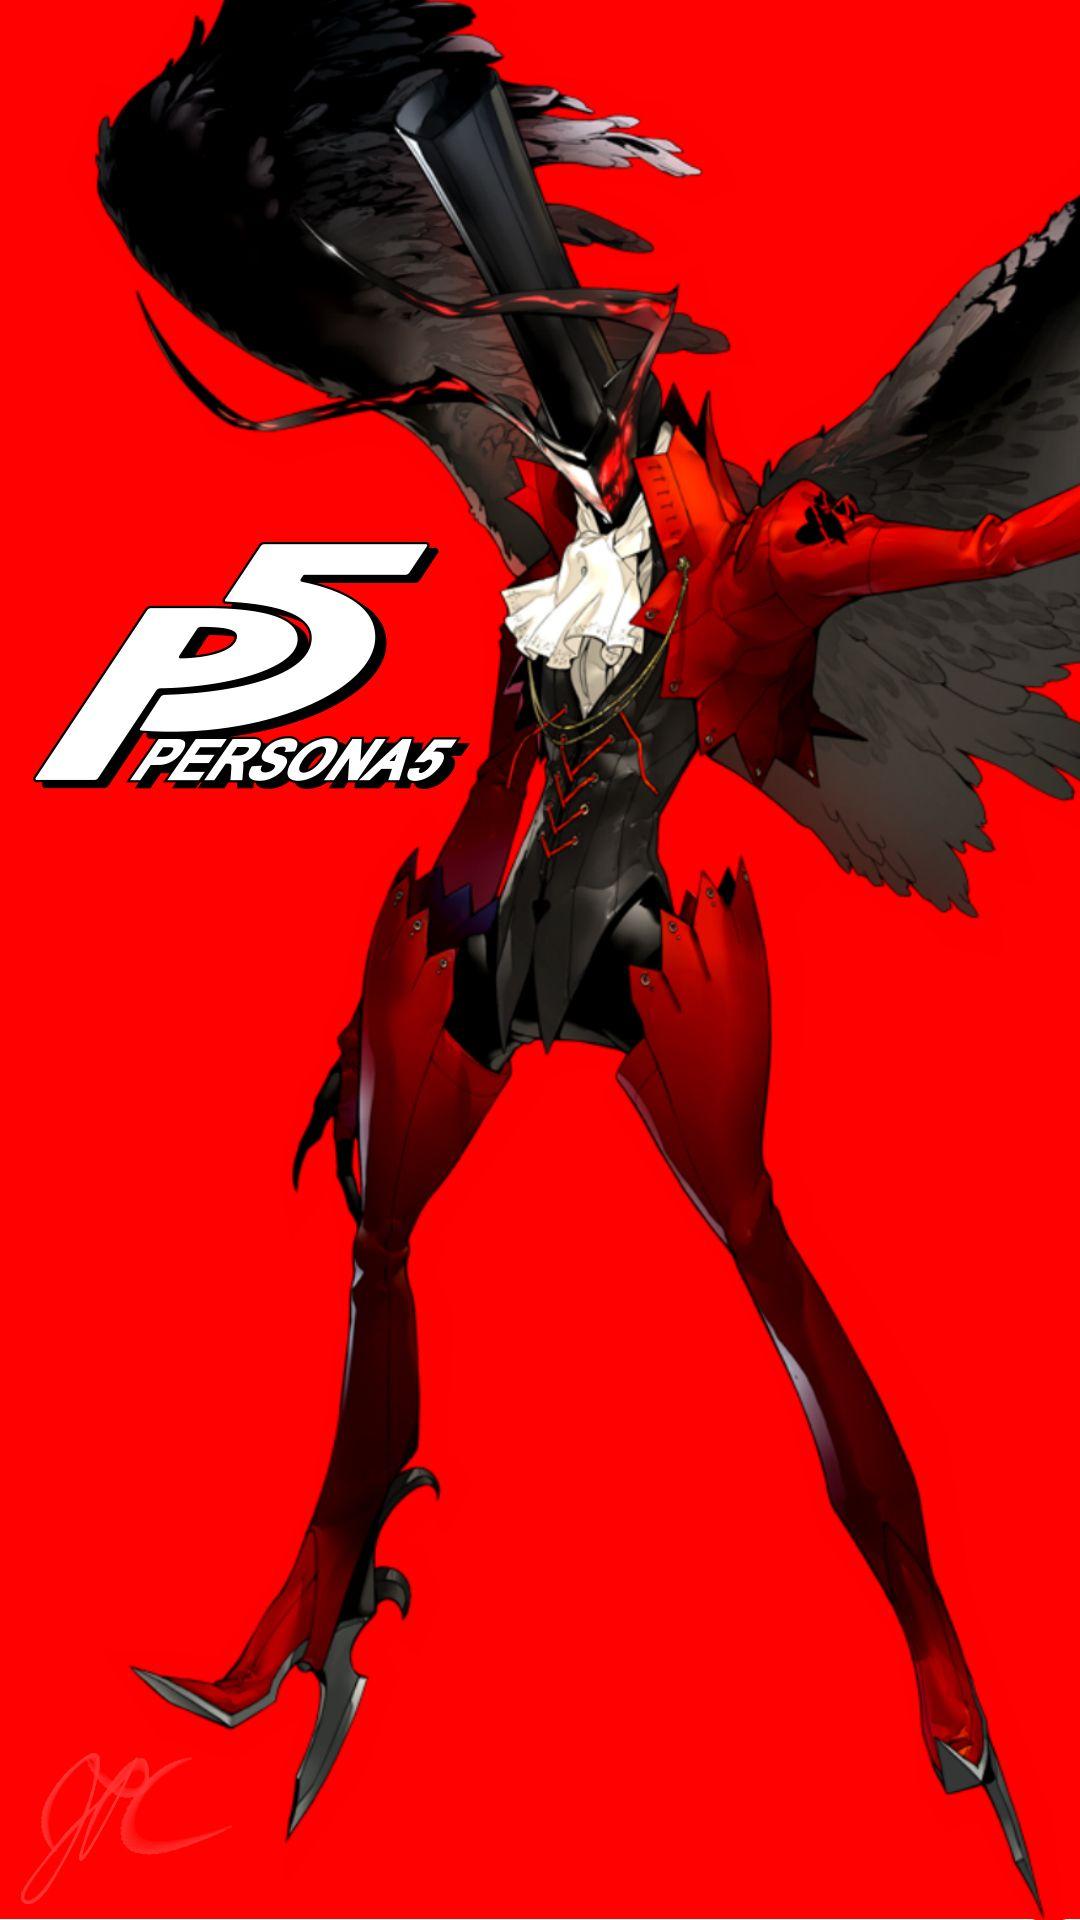 Phone Wallpaper of the Personas of Persona 5